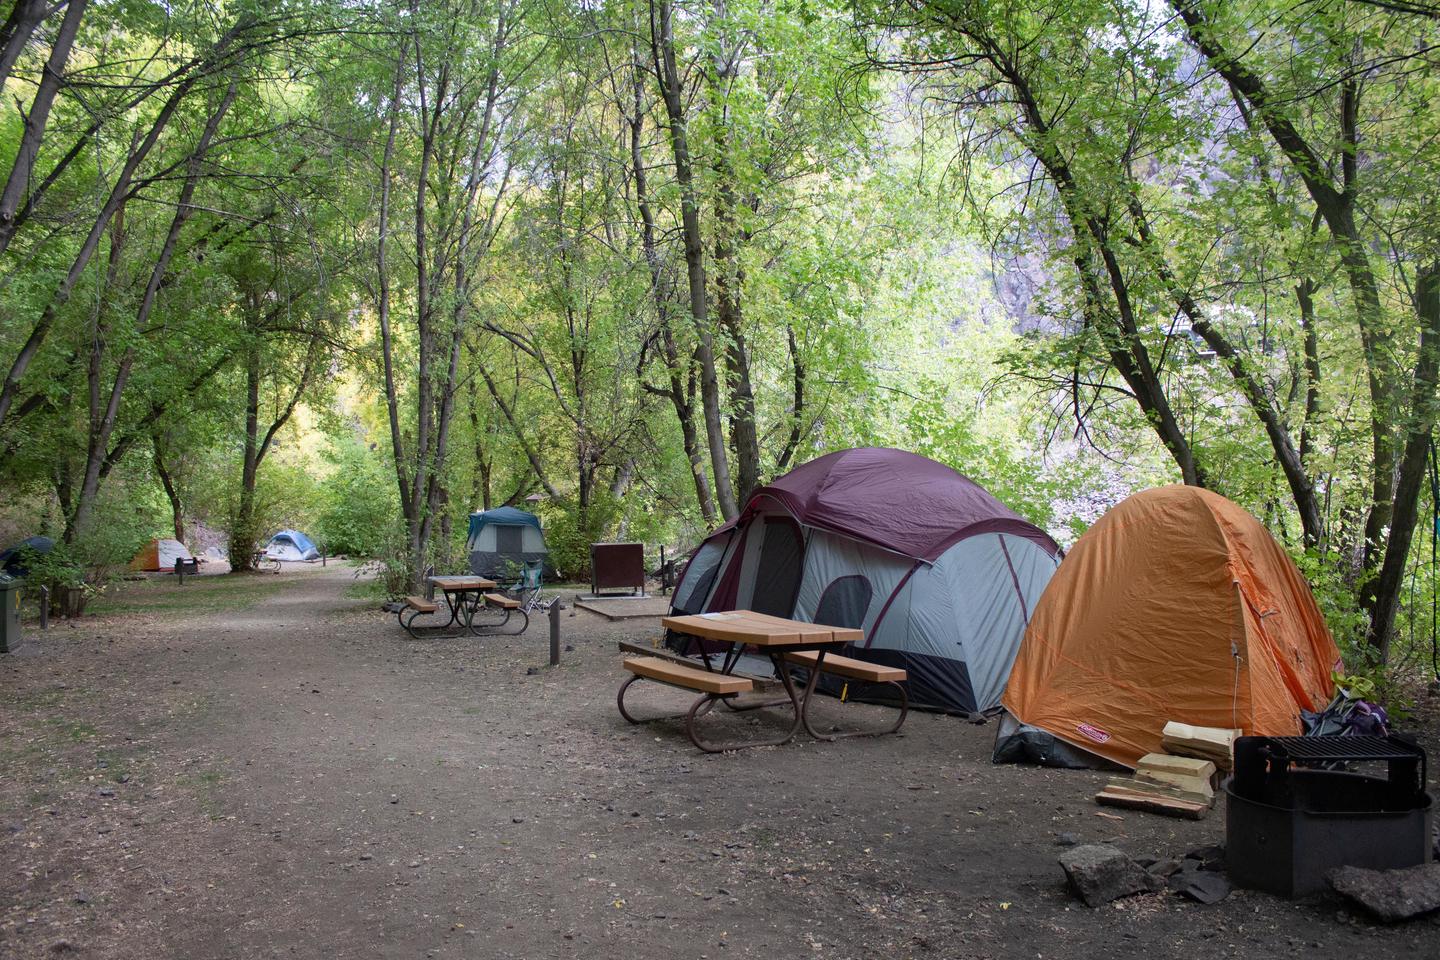 East Portal Campground - Walk-in sitesTen of the 15 sites are walk-in tent sites.